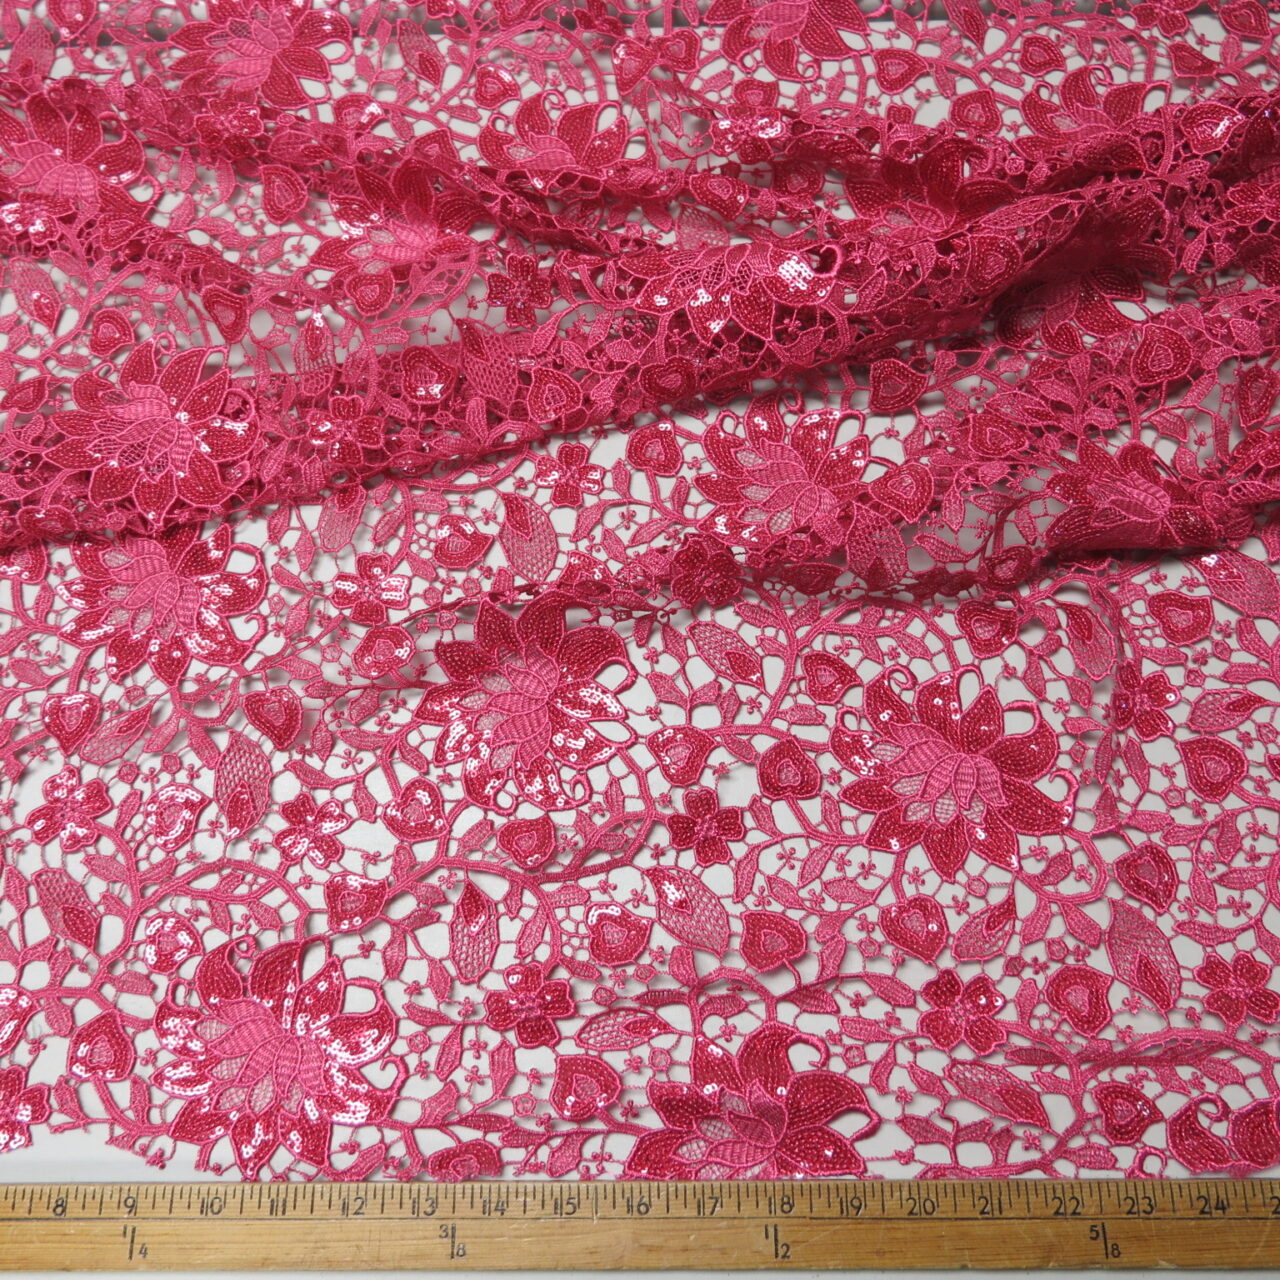 Fuchsia pink lace - Guipure lace - lace fabric from